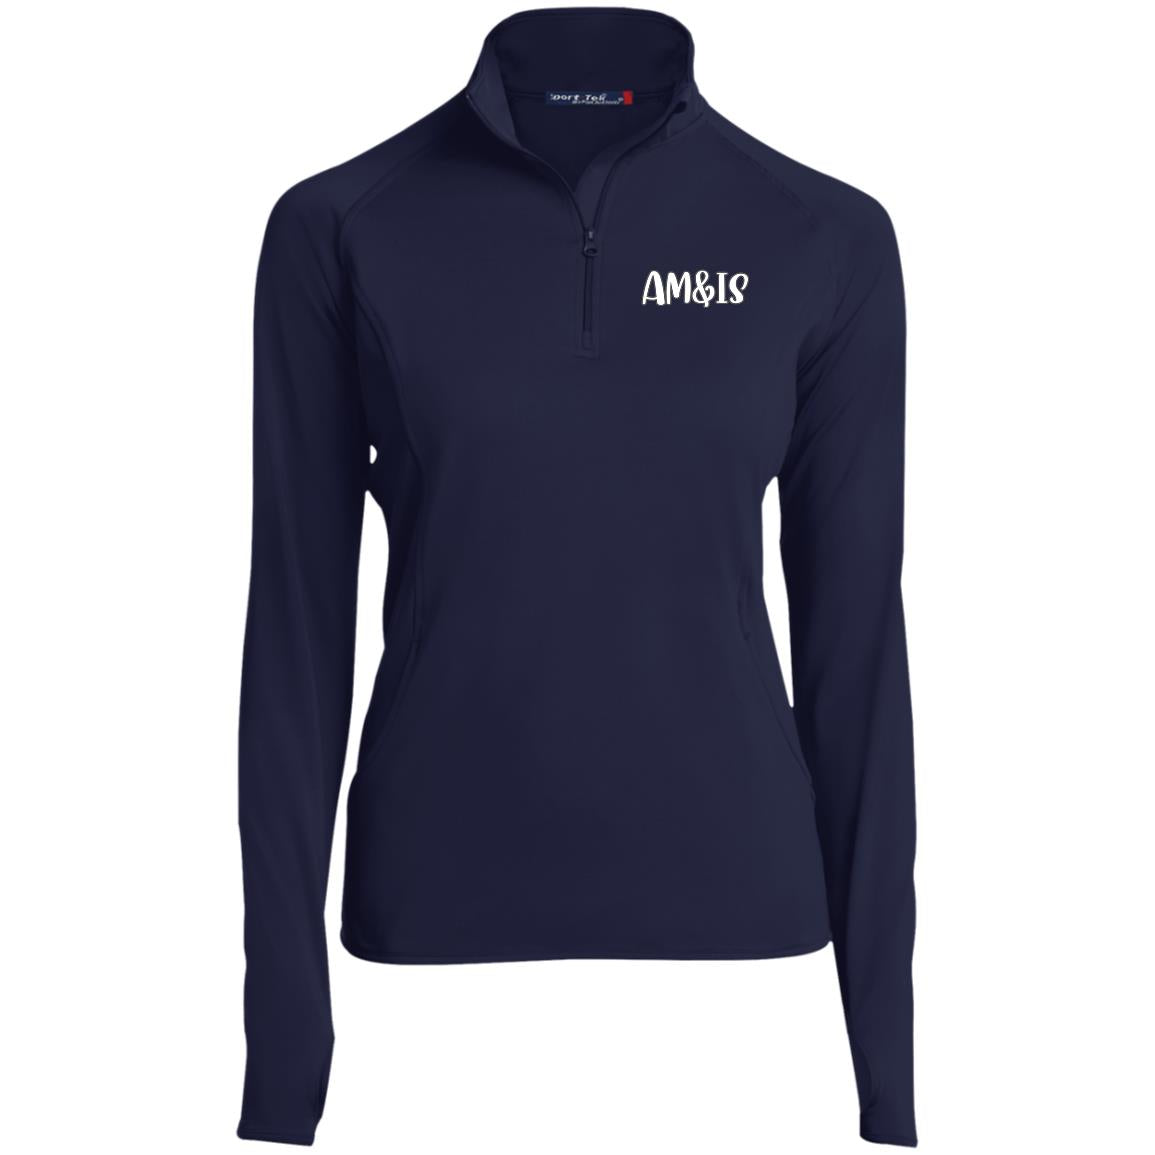 TRUE NAVY - AM&IS Activewear Ladies' 1/2 Zip Performance Pullover - womens shirt at TFC&H Co.